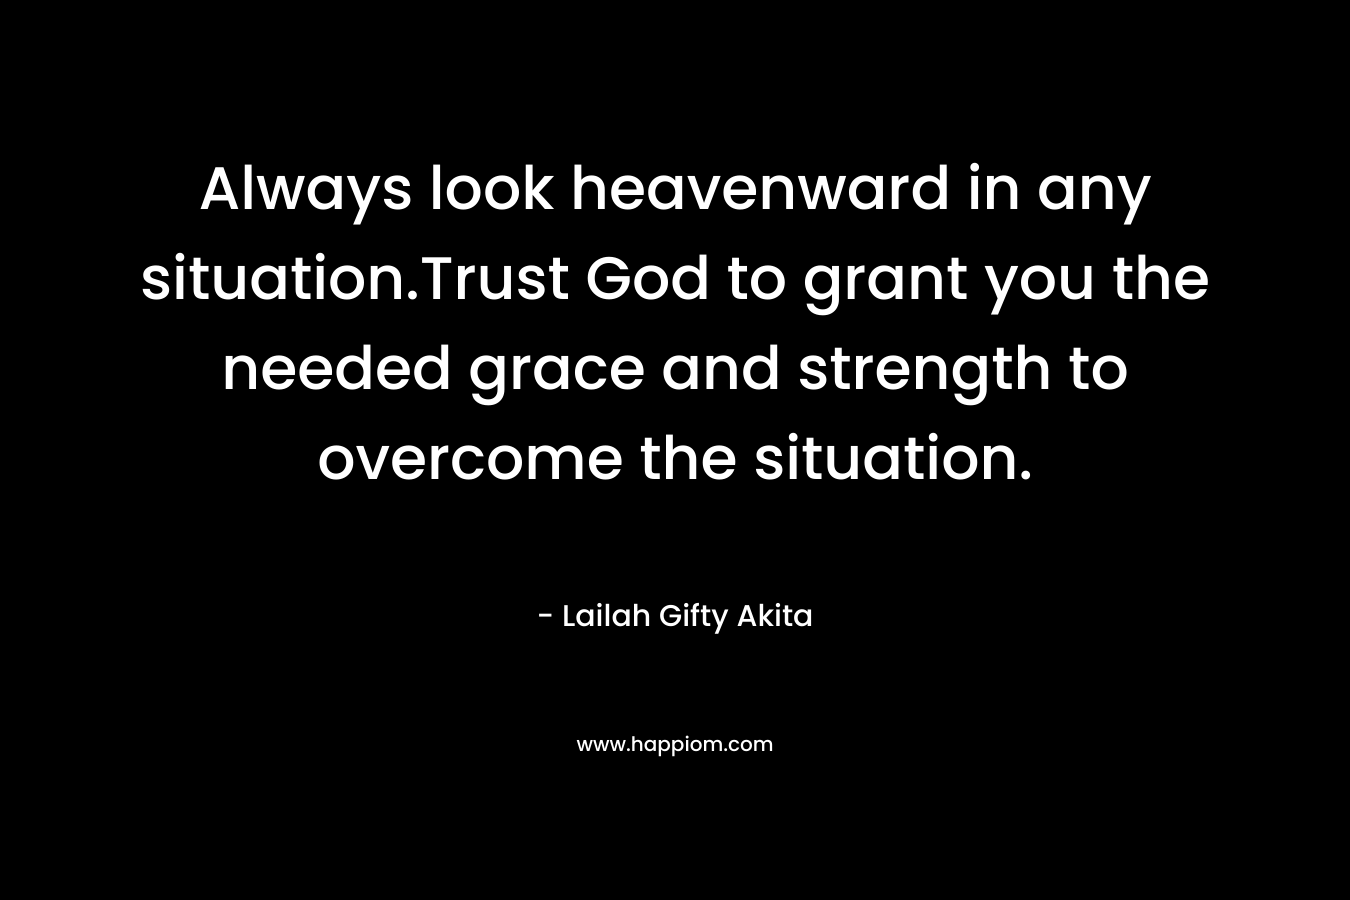 Always look heavenward in any situation.Trust God to grant you the needed grace and strength to overcome the situation. – Lailah Gifty Akita